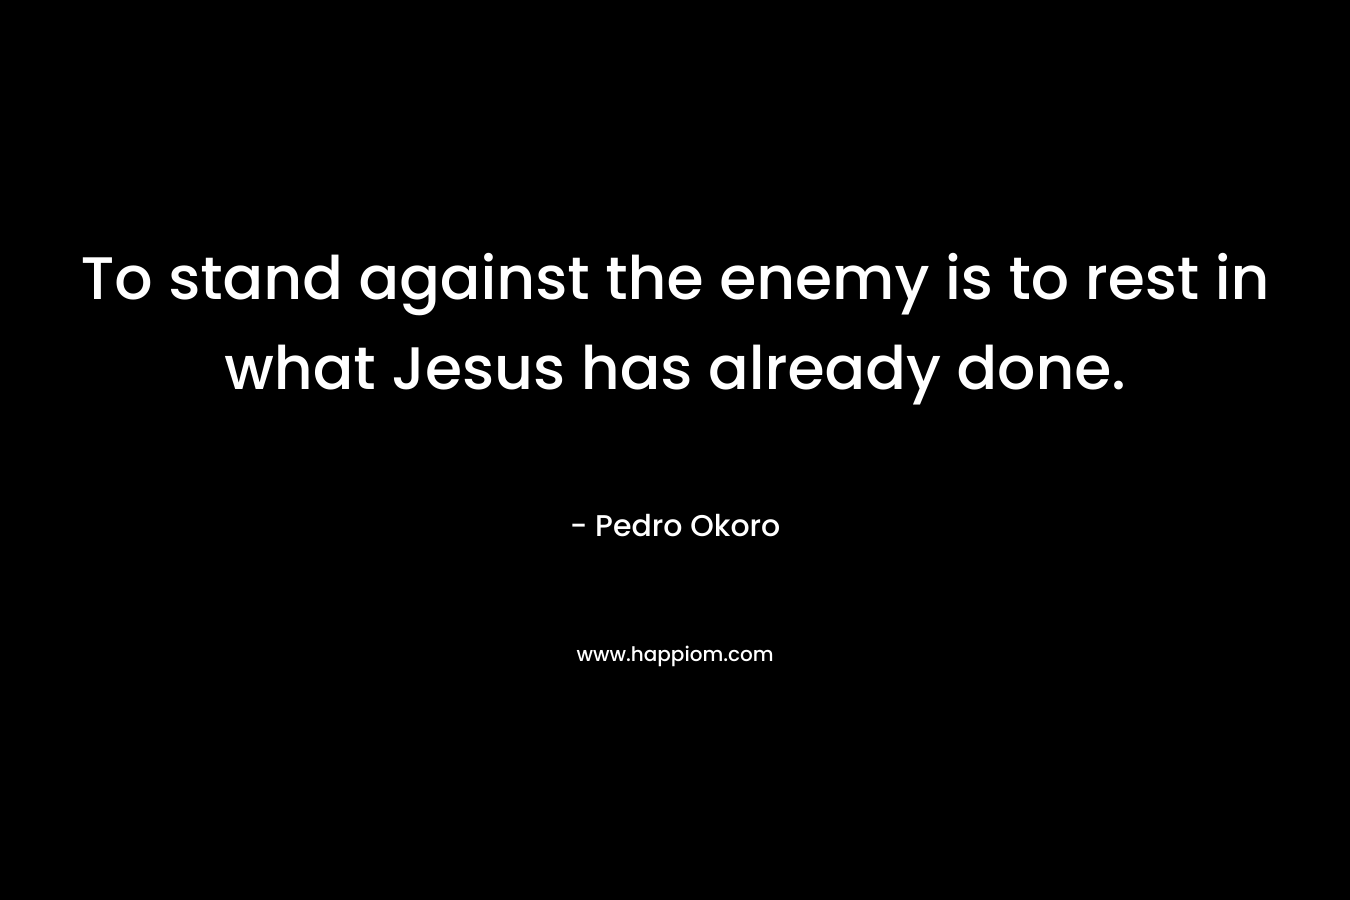 To stand against the enemy is to rest in what Jesus has already done.